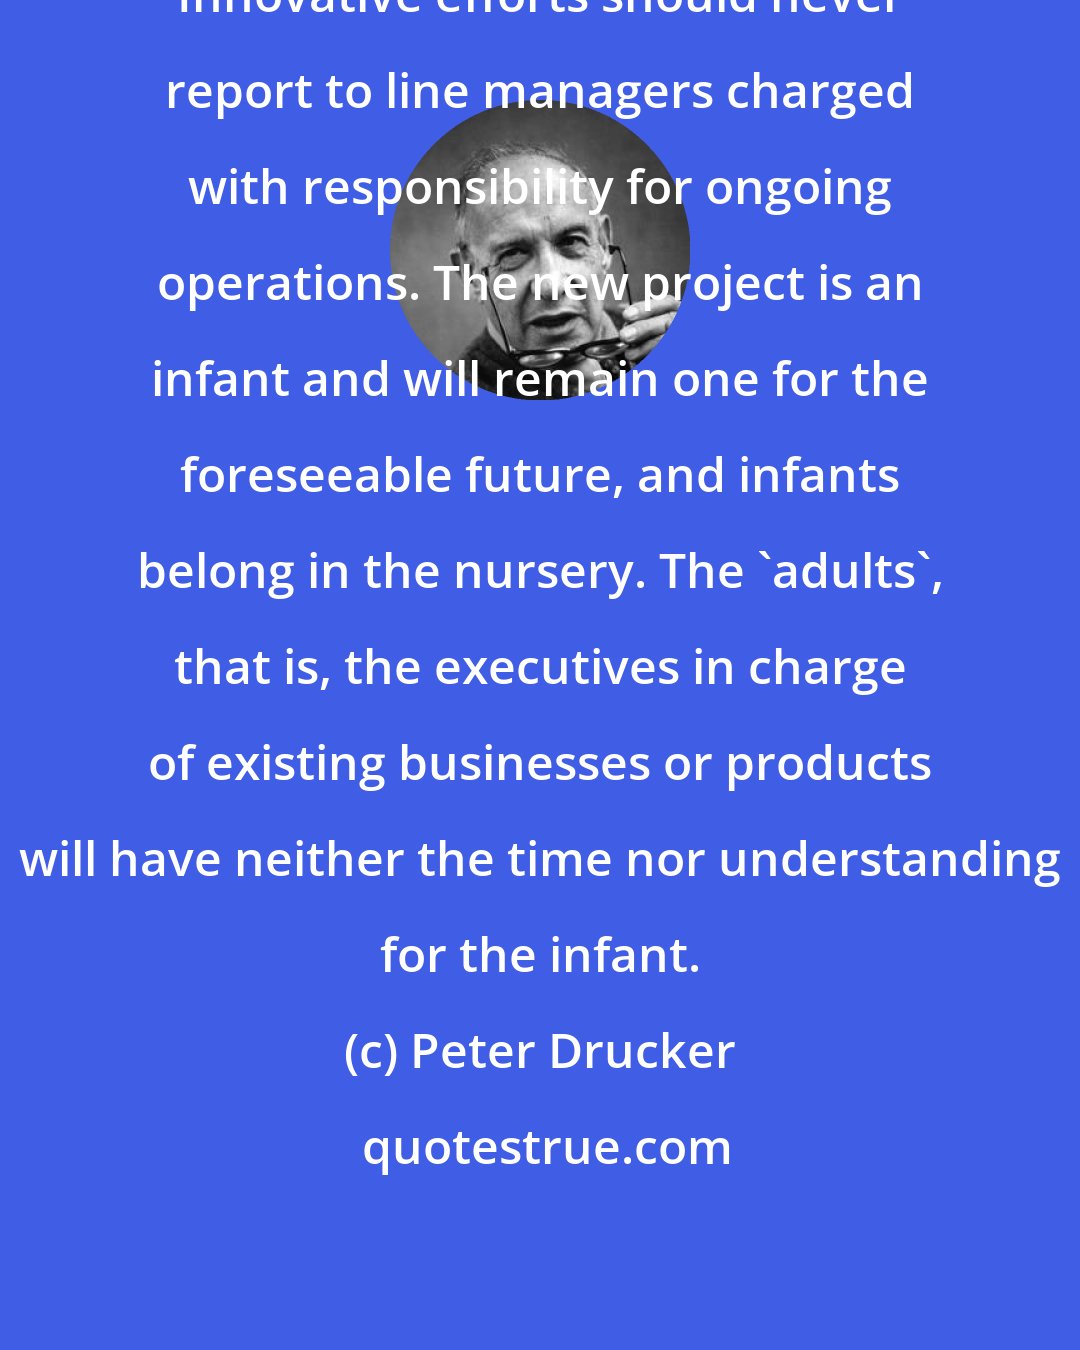 Peter Drucker: Innovative efforts should never report to line managers charged with responsibility for ongoing operations. The new project is an infant and will remain one for the foreseeable future, and infants belong in the nursery. The 'adults', that is, the executives in charge of existing businesses or products will have neither the time nor understanding for the infant.